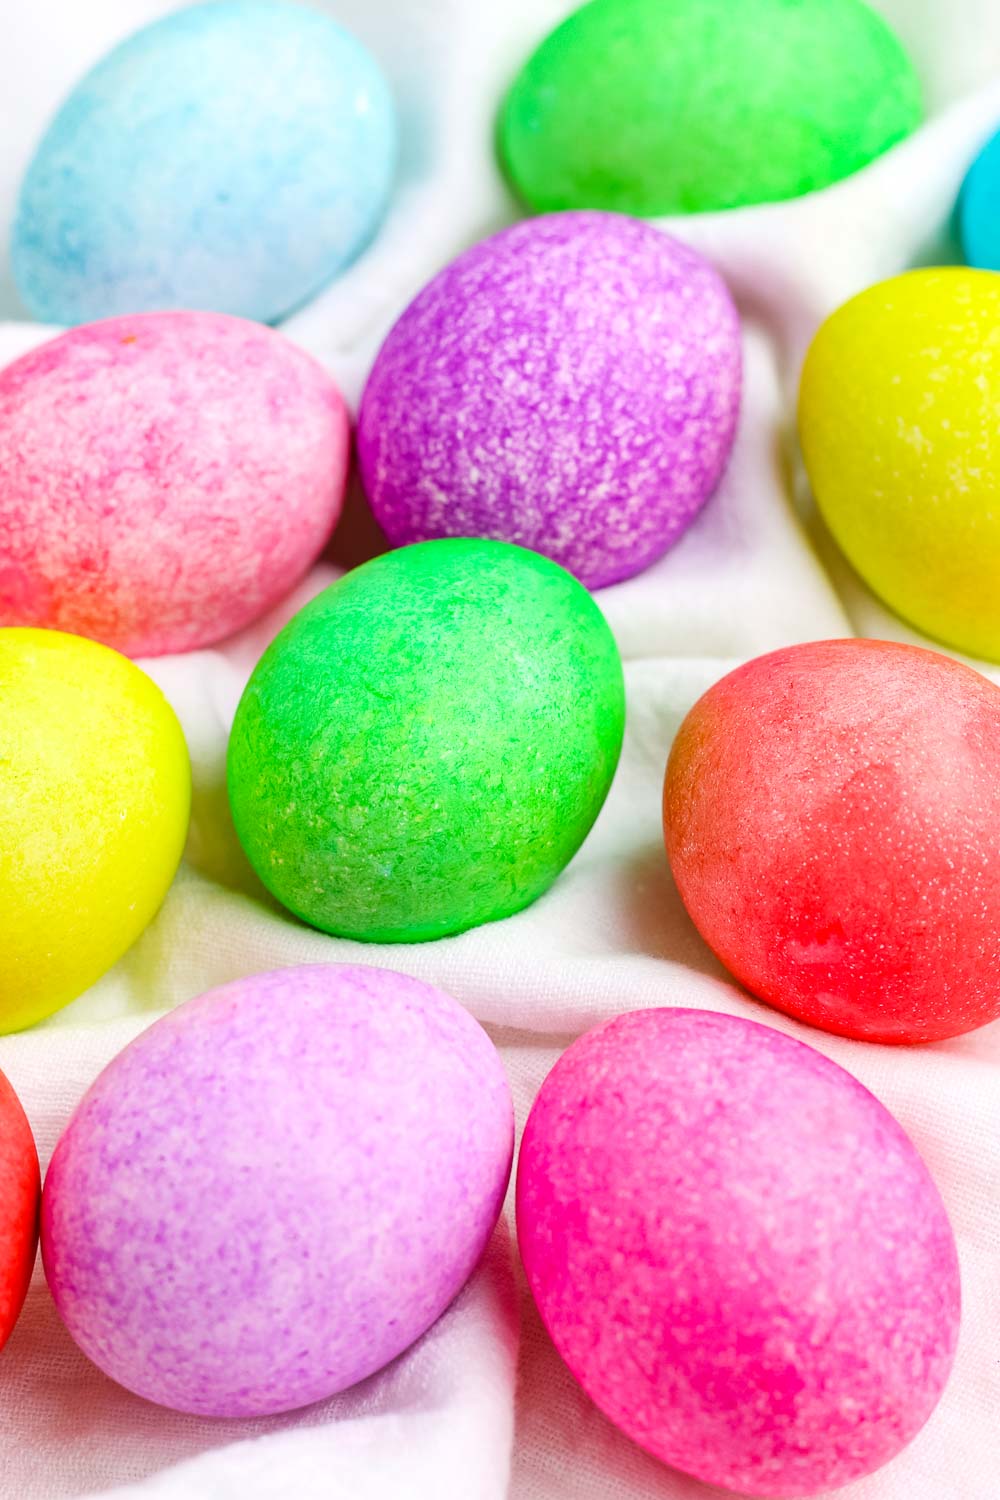 How to Dye Easter Eggs with Food Coloring and Rice Budget Recipes